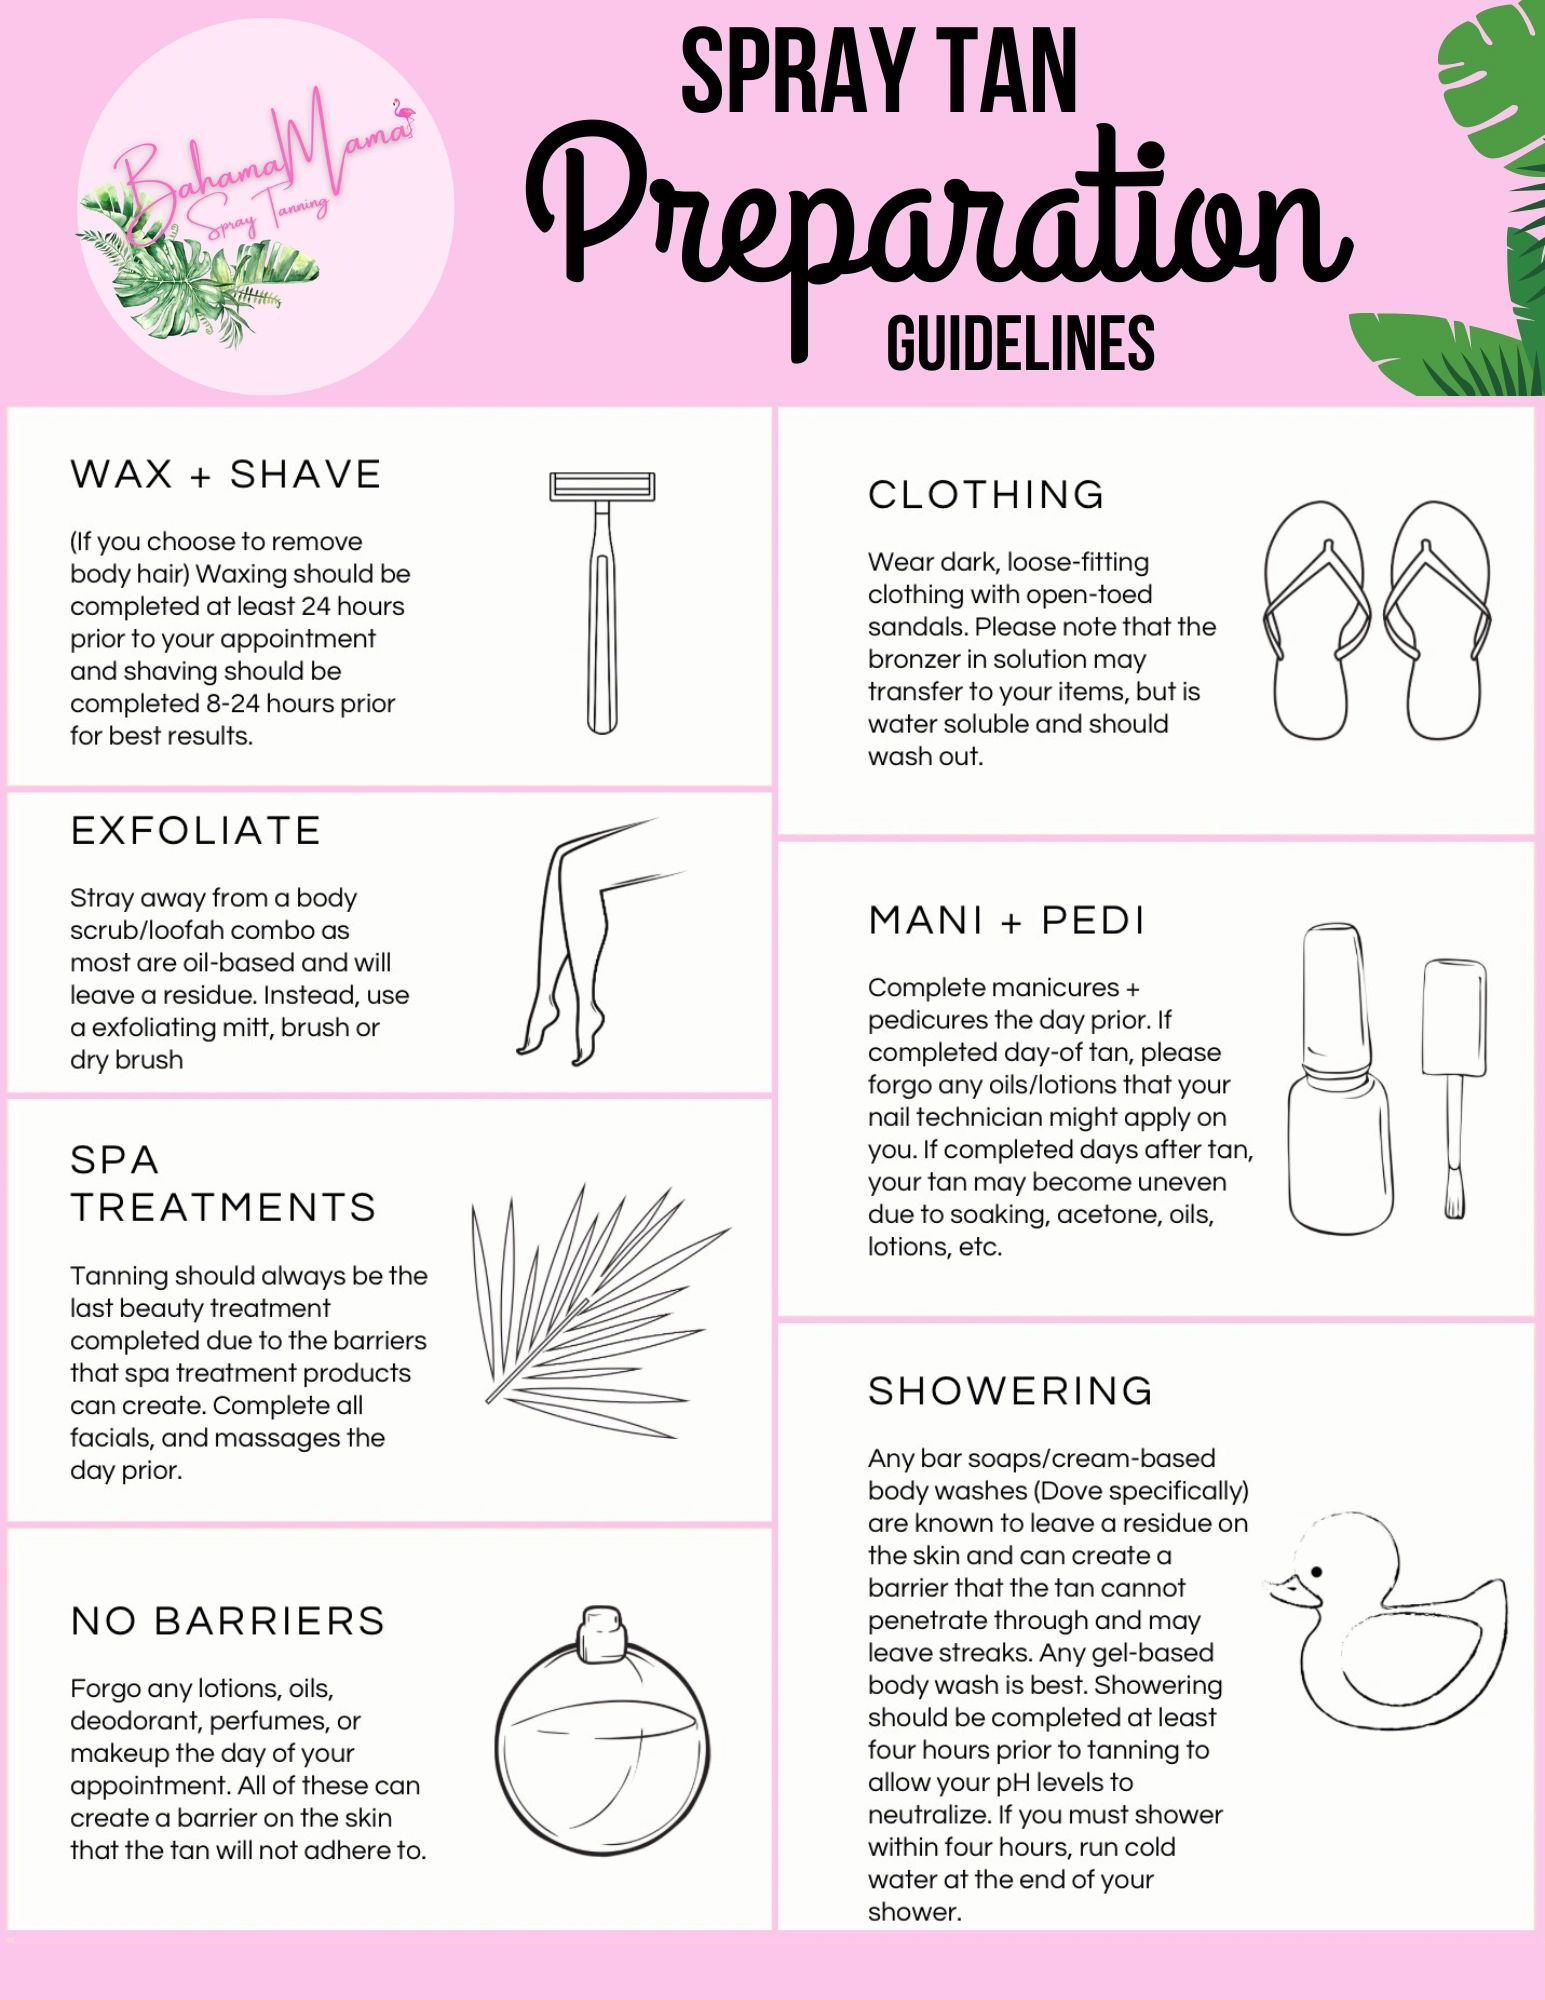 Preparation+Aftercare